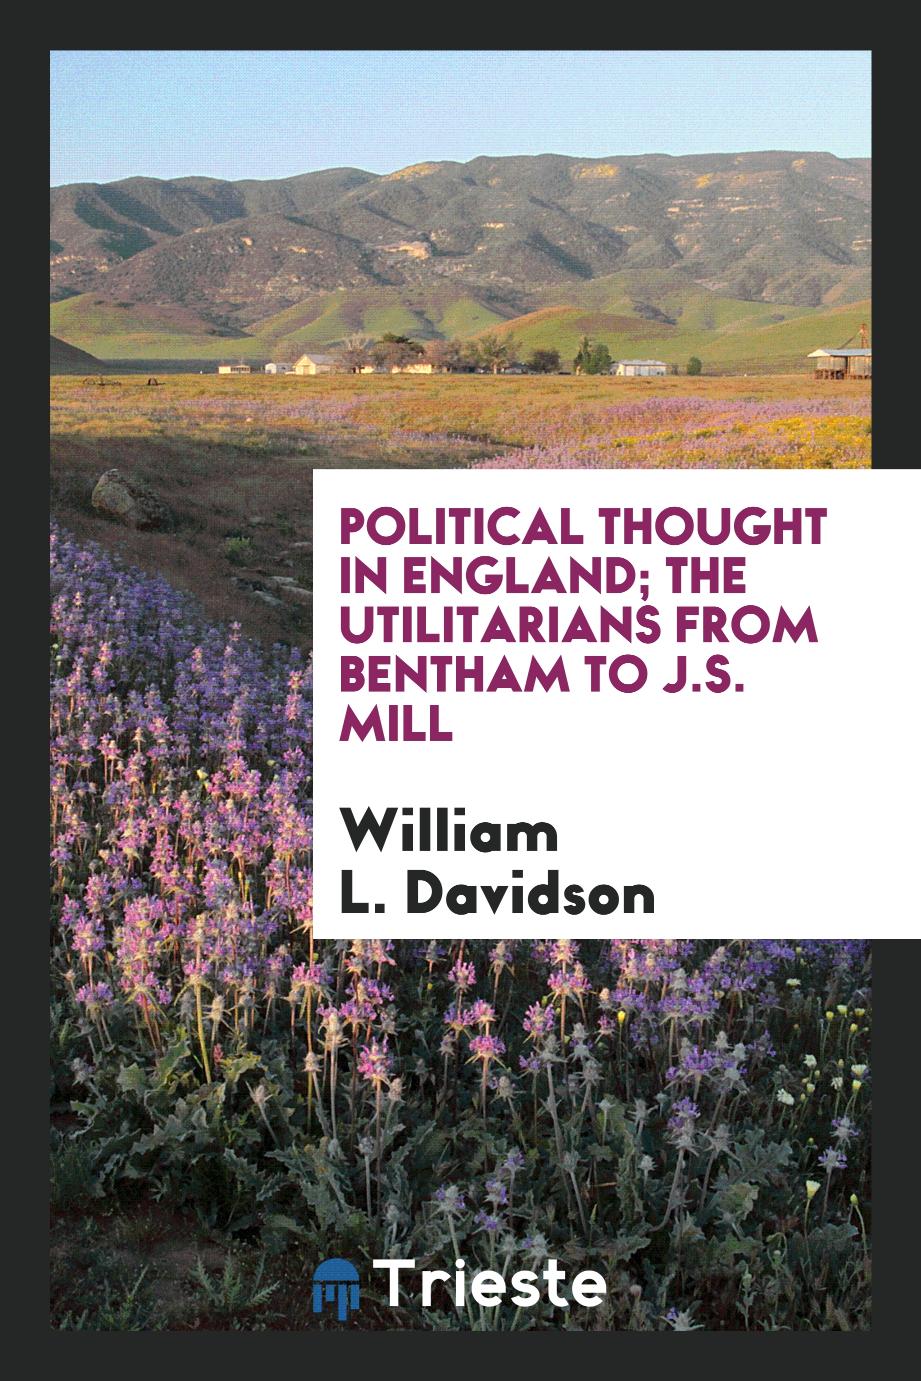 Political thought in England; the utilitarians from Bentham to J.S. Mill